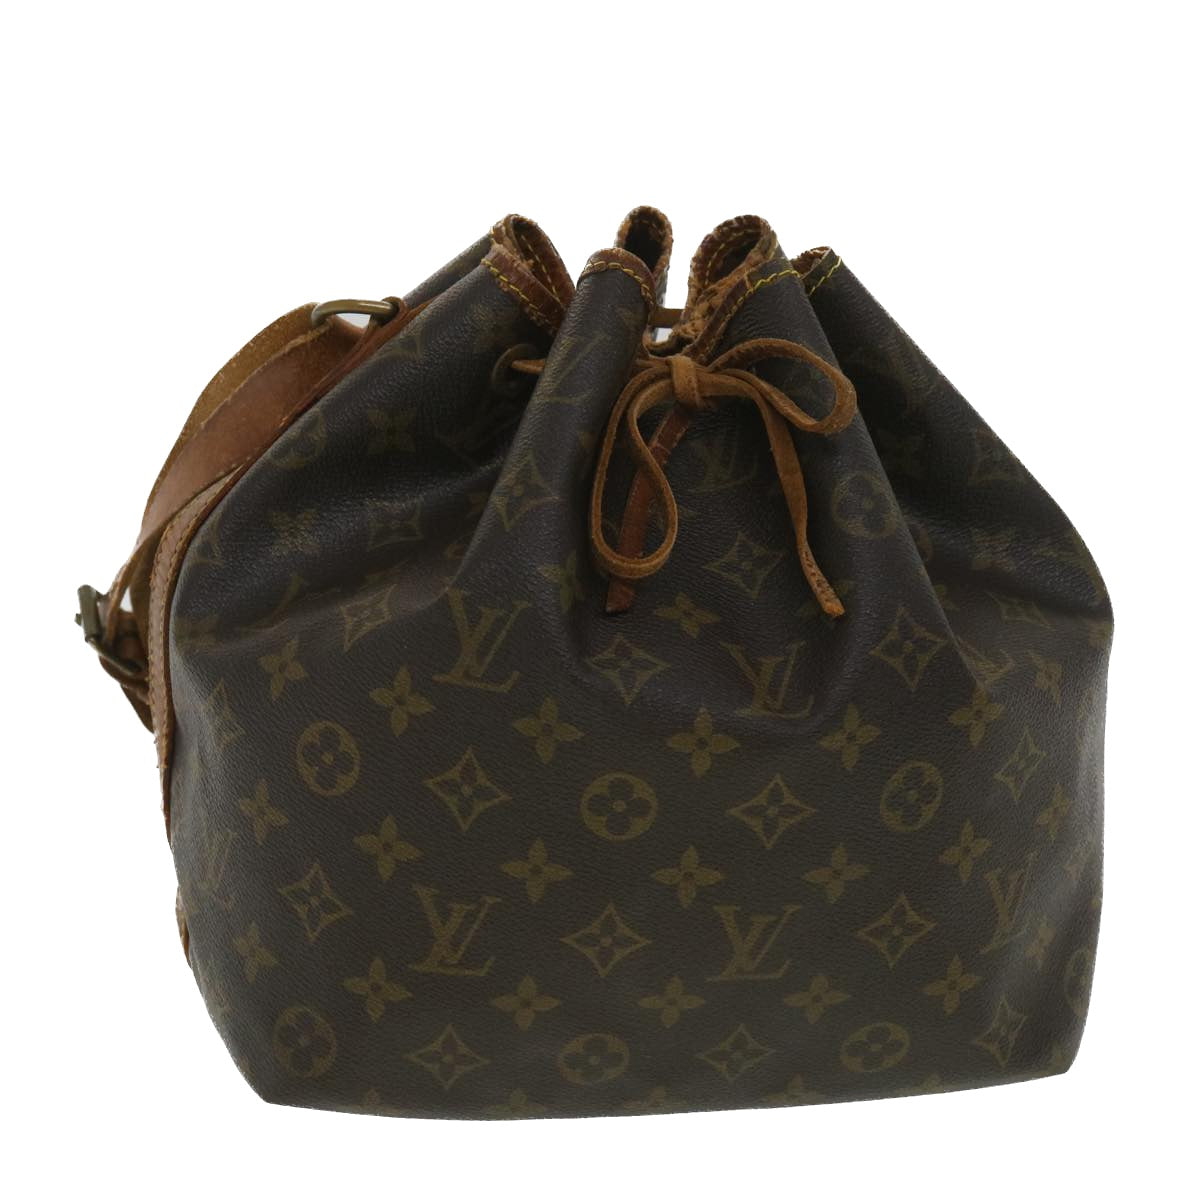 Pre Owned Louis Vuitton Handbags in Australia a Look at the Latest Styles &  Trends